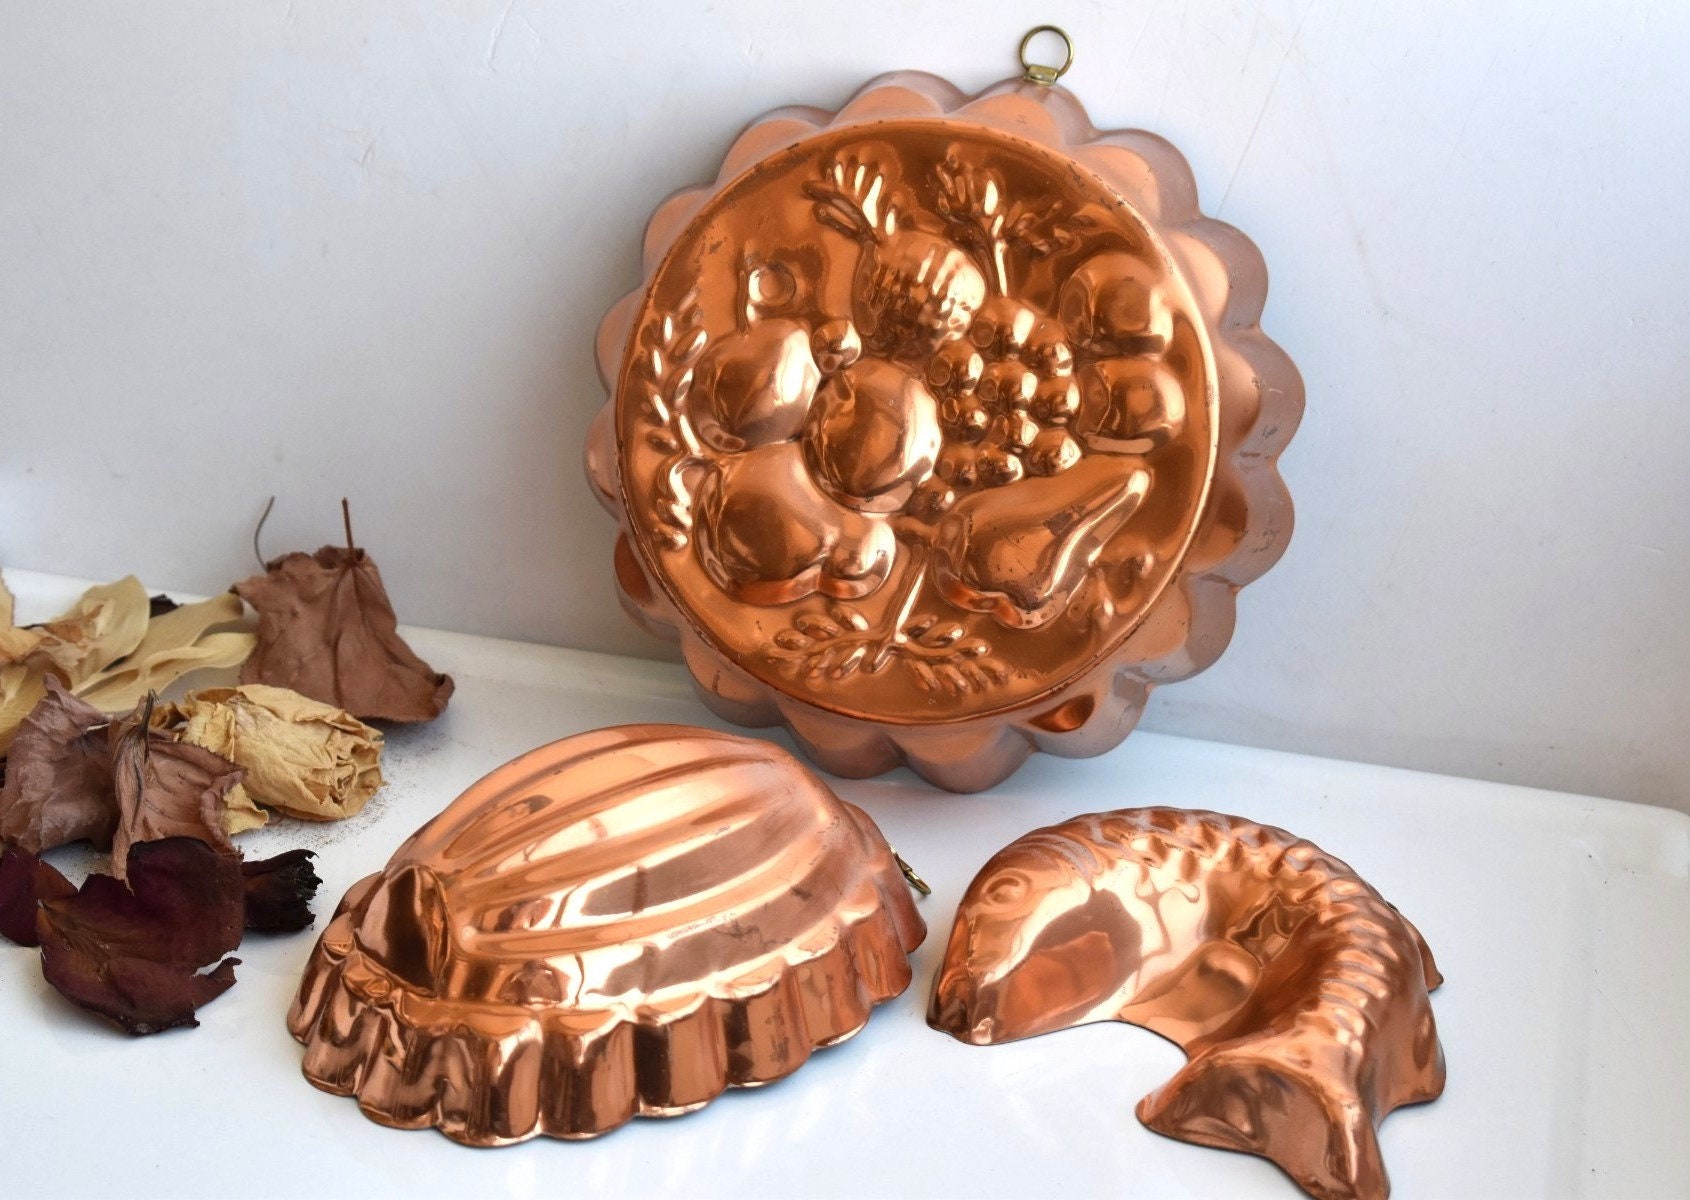 A Vintage Copper Cake or Fruit Dessert Jell-O Mold or Wall Decoration An Aluminum Copper Fruit Mold Can Also Be Used as a Cake Pan